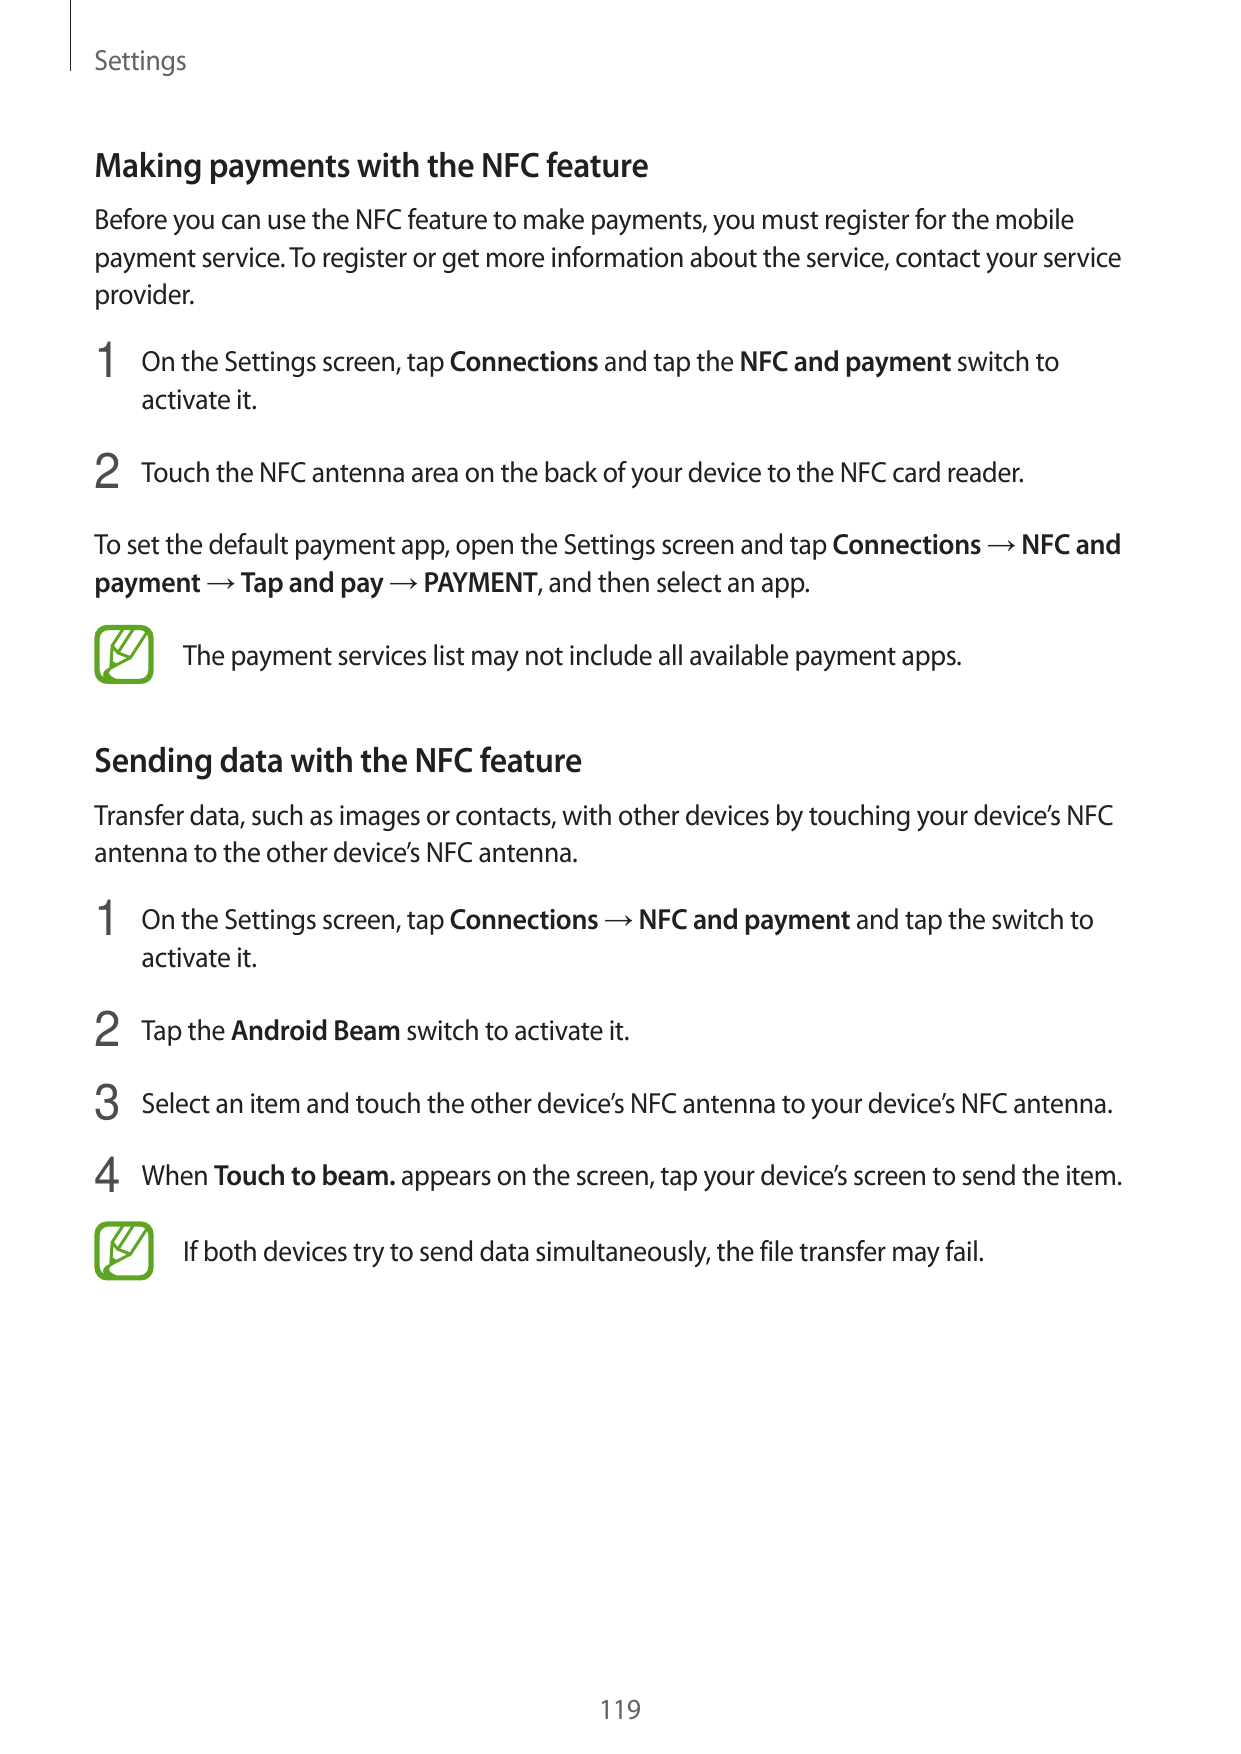 SettingsMaking payments with the NFC featureBefore you can use the NFC feature to make payments, you must register for the mobil